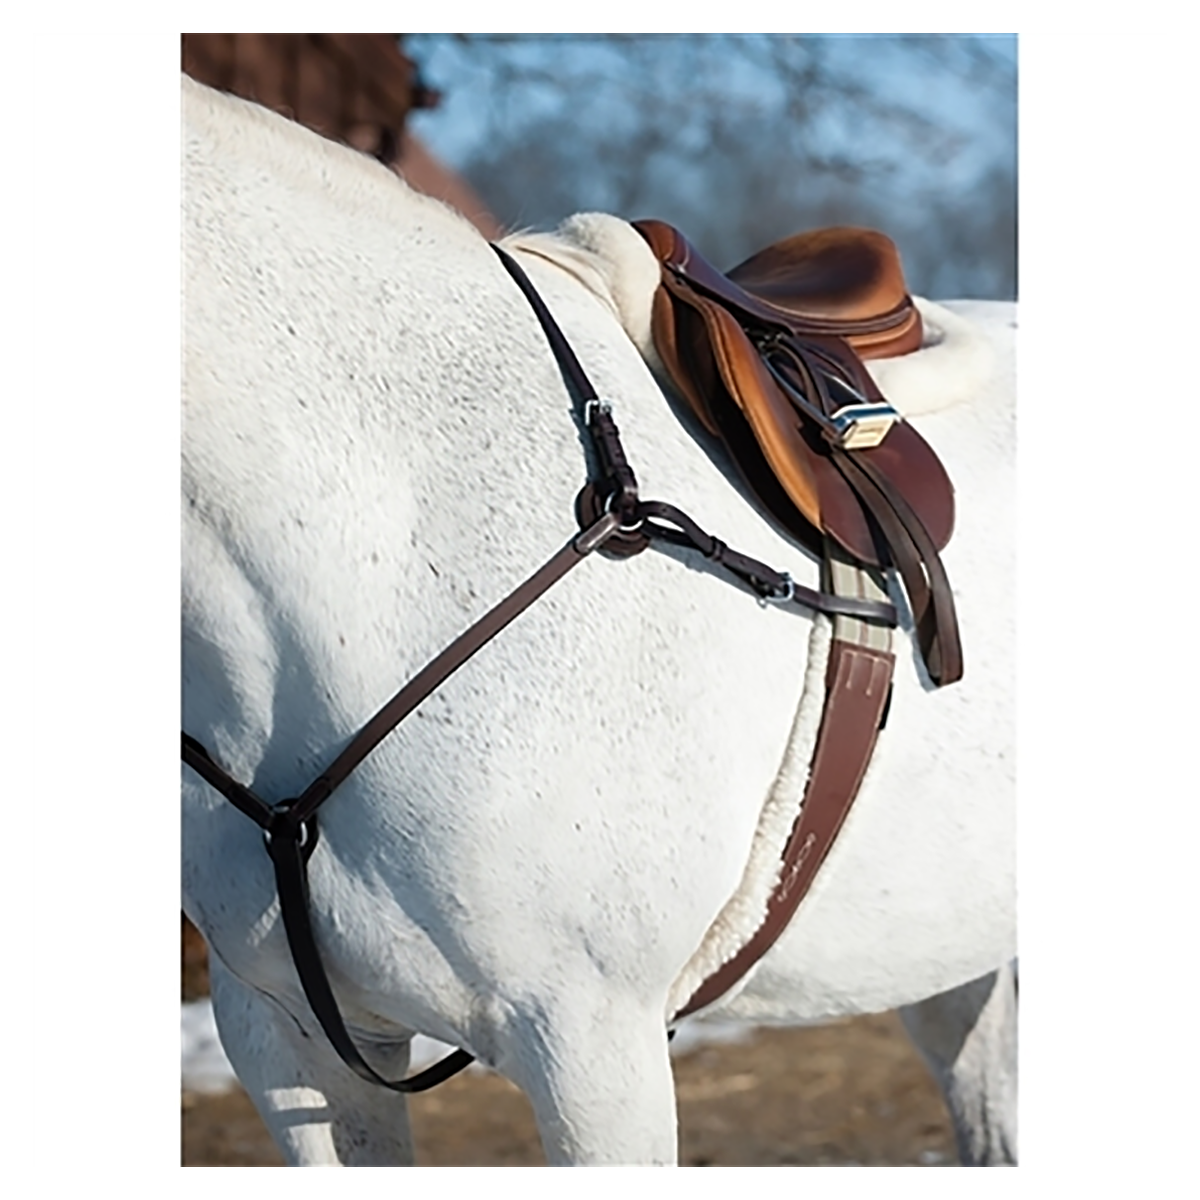 Nunn Finer 3 Way Hunting Breastplate with Elastic